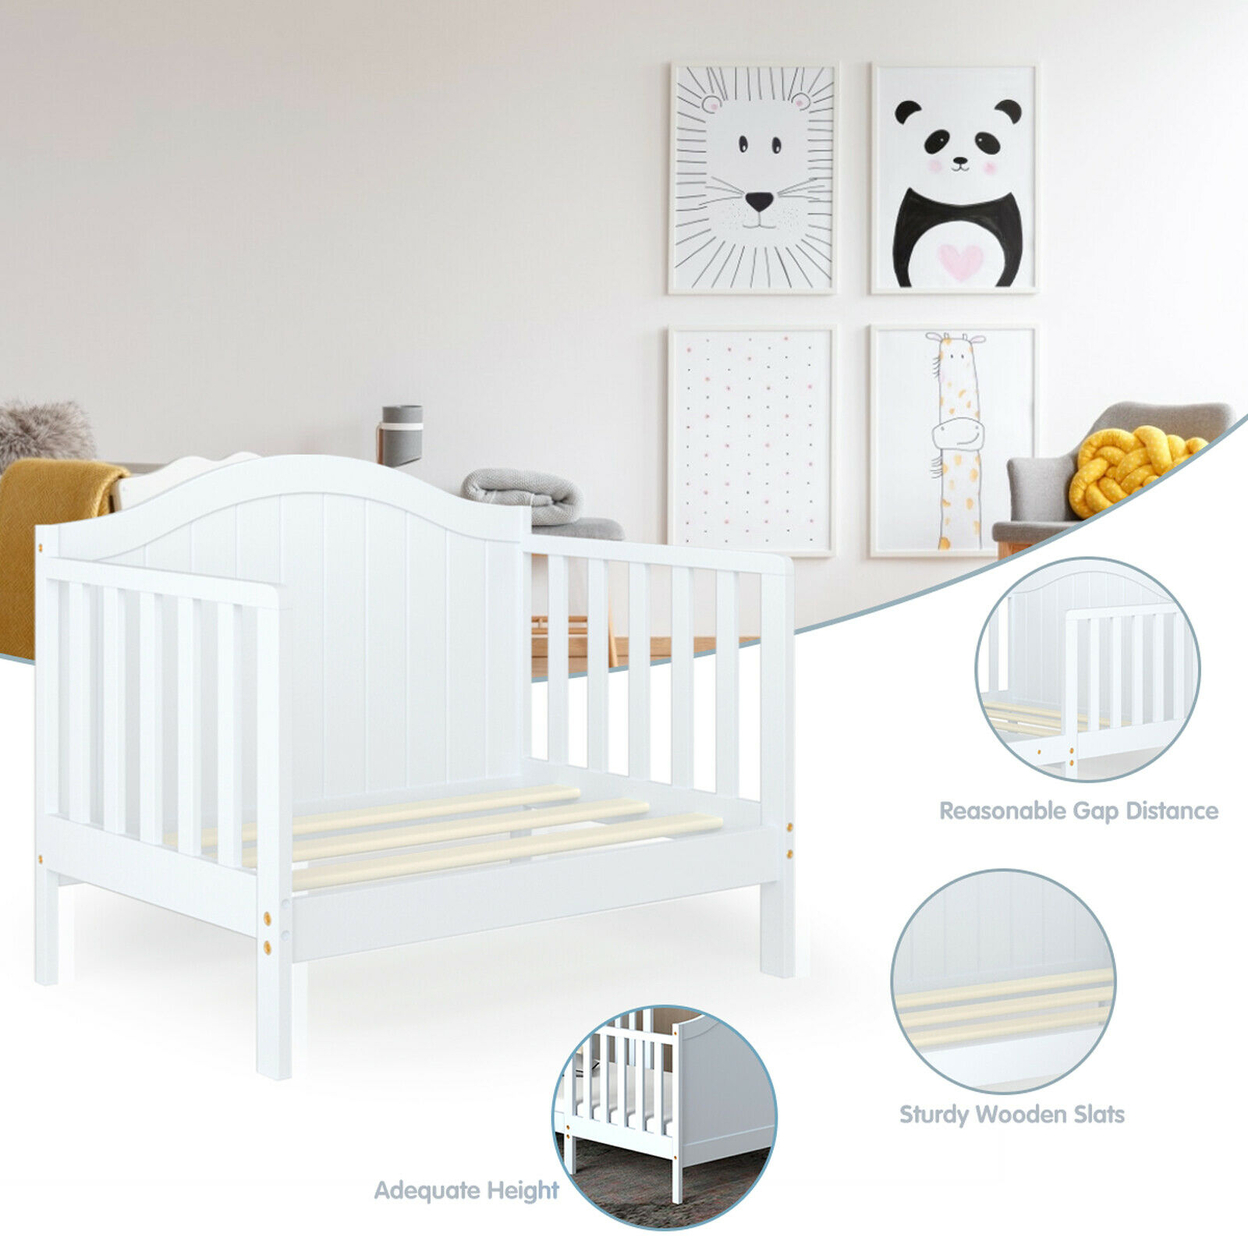 2-in-1 Convertible Toddler Bed Kids Wooden Bedroom Furniture W/ Guardrails - White